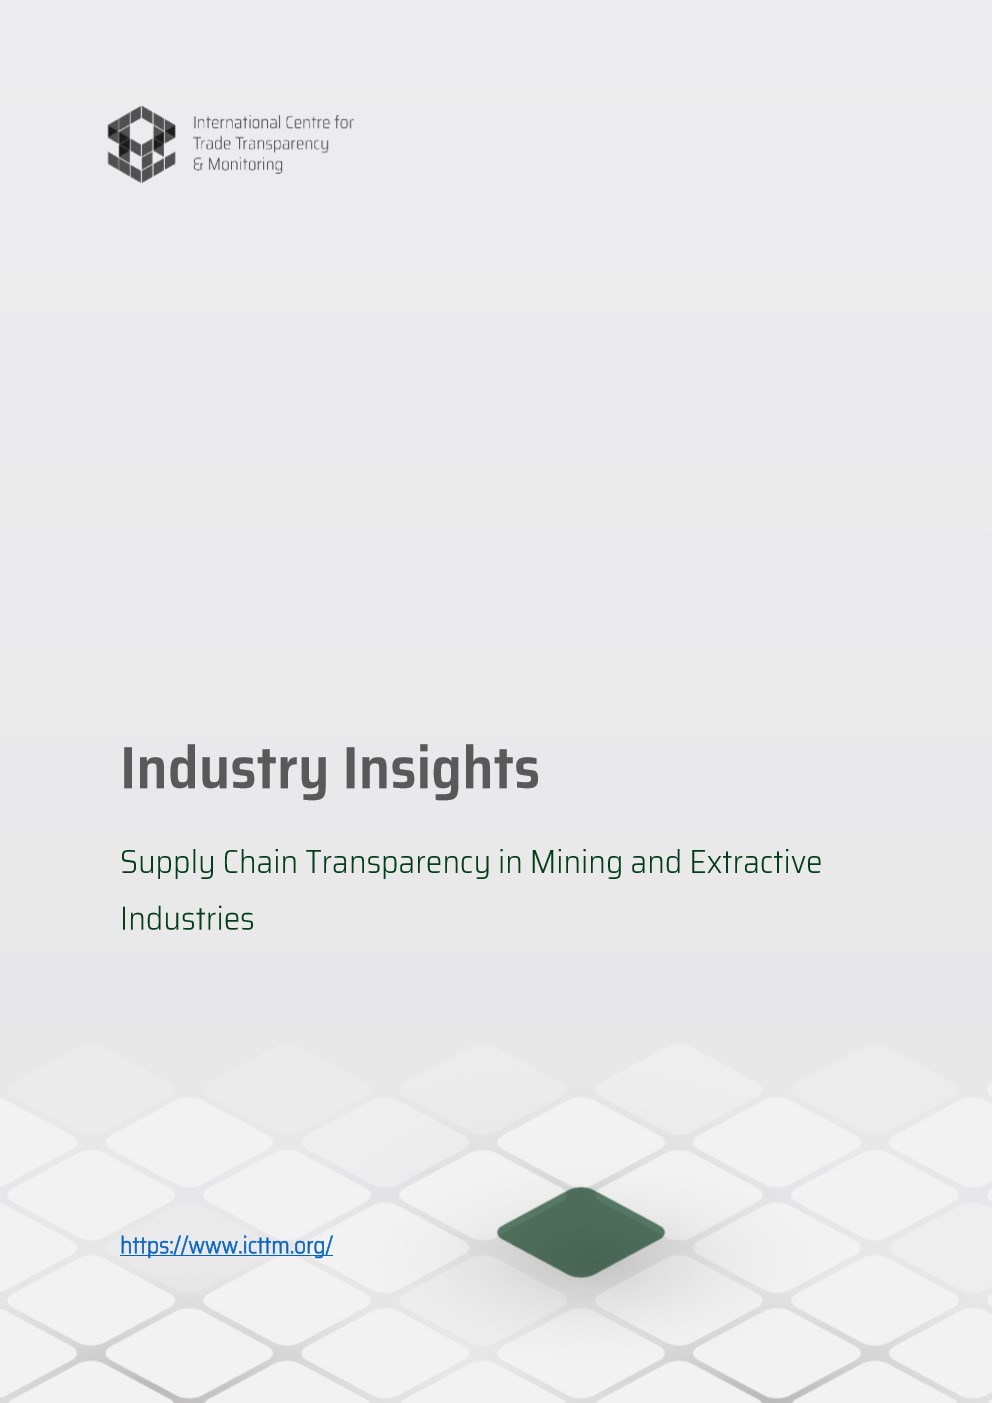 Supply Chain Transparency in Mining and Extractive Industries